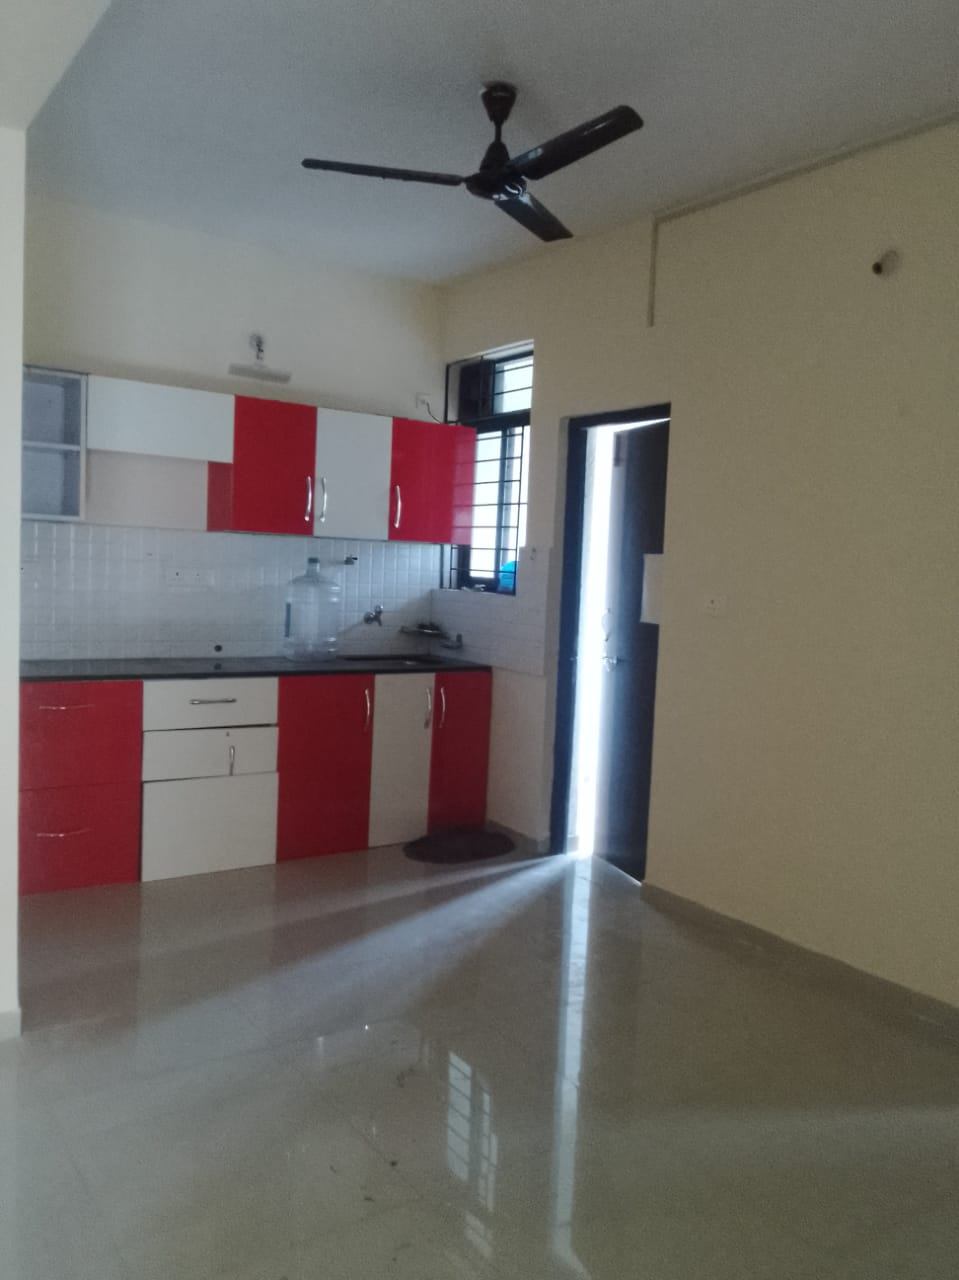 2 Bed/ 3 Bath Rent Apartment/ Flat; 1,200 sq. ft. carpet area, UnFurnished for rent @Akar Heights